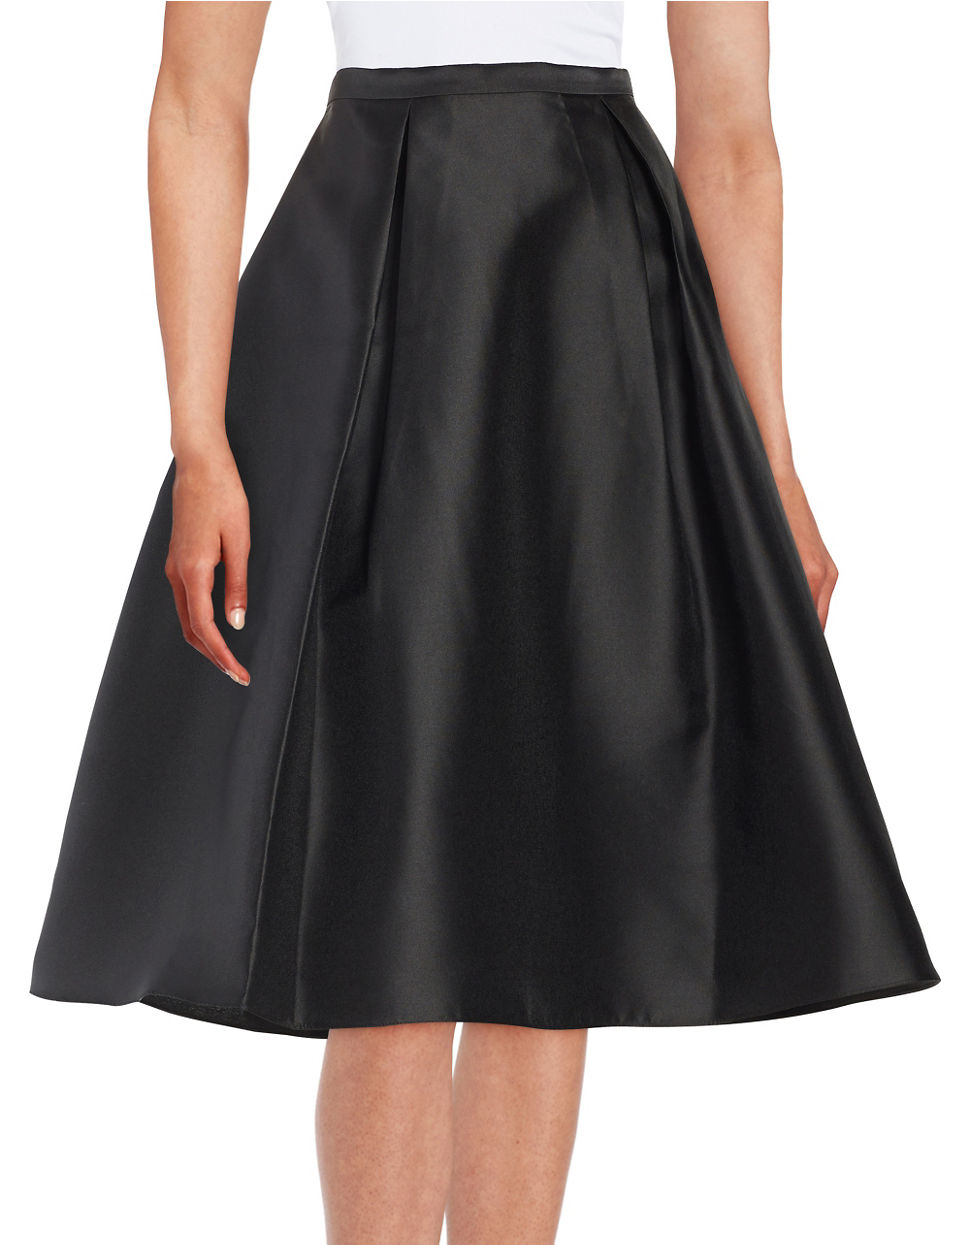 Lyst - Adrianna Papell Satin Party Skirt in Black